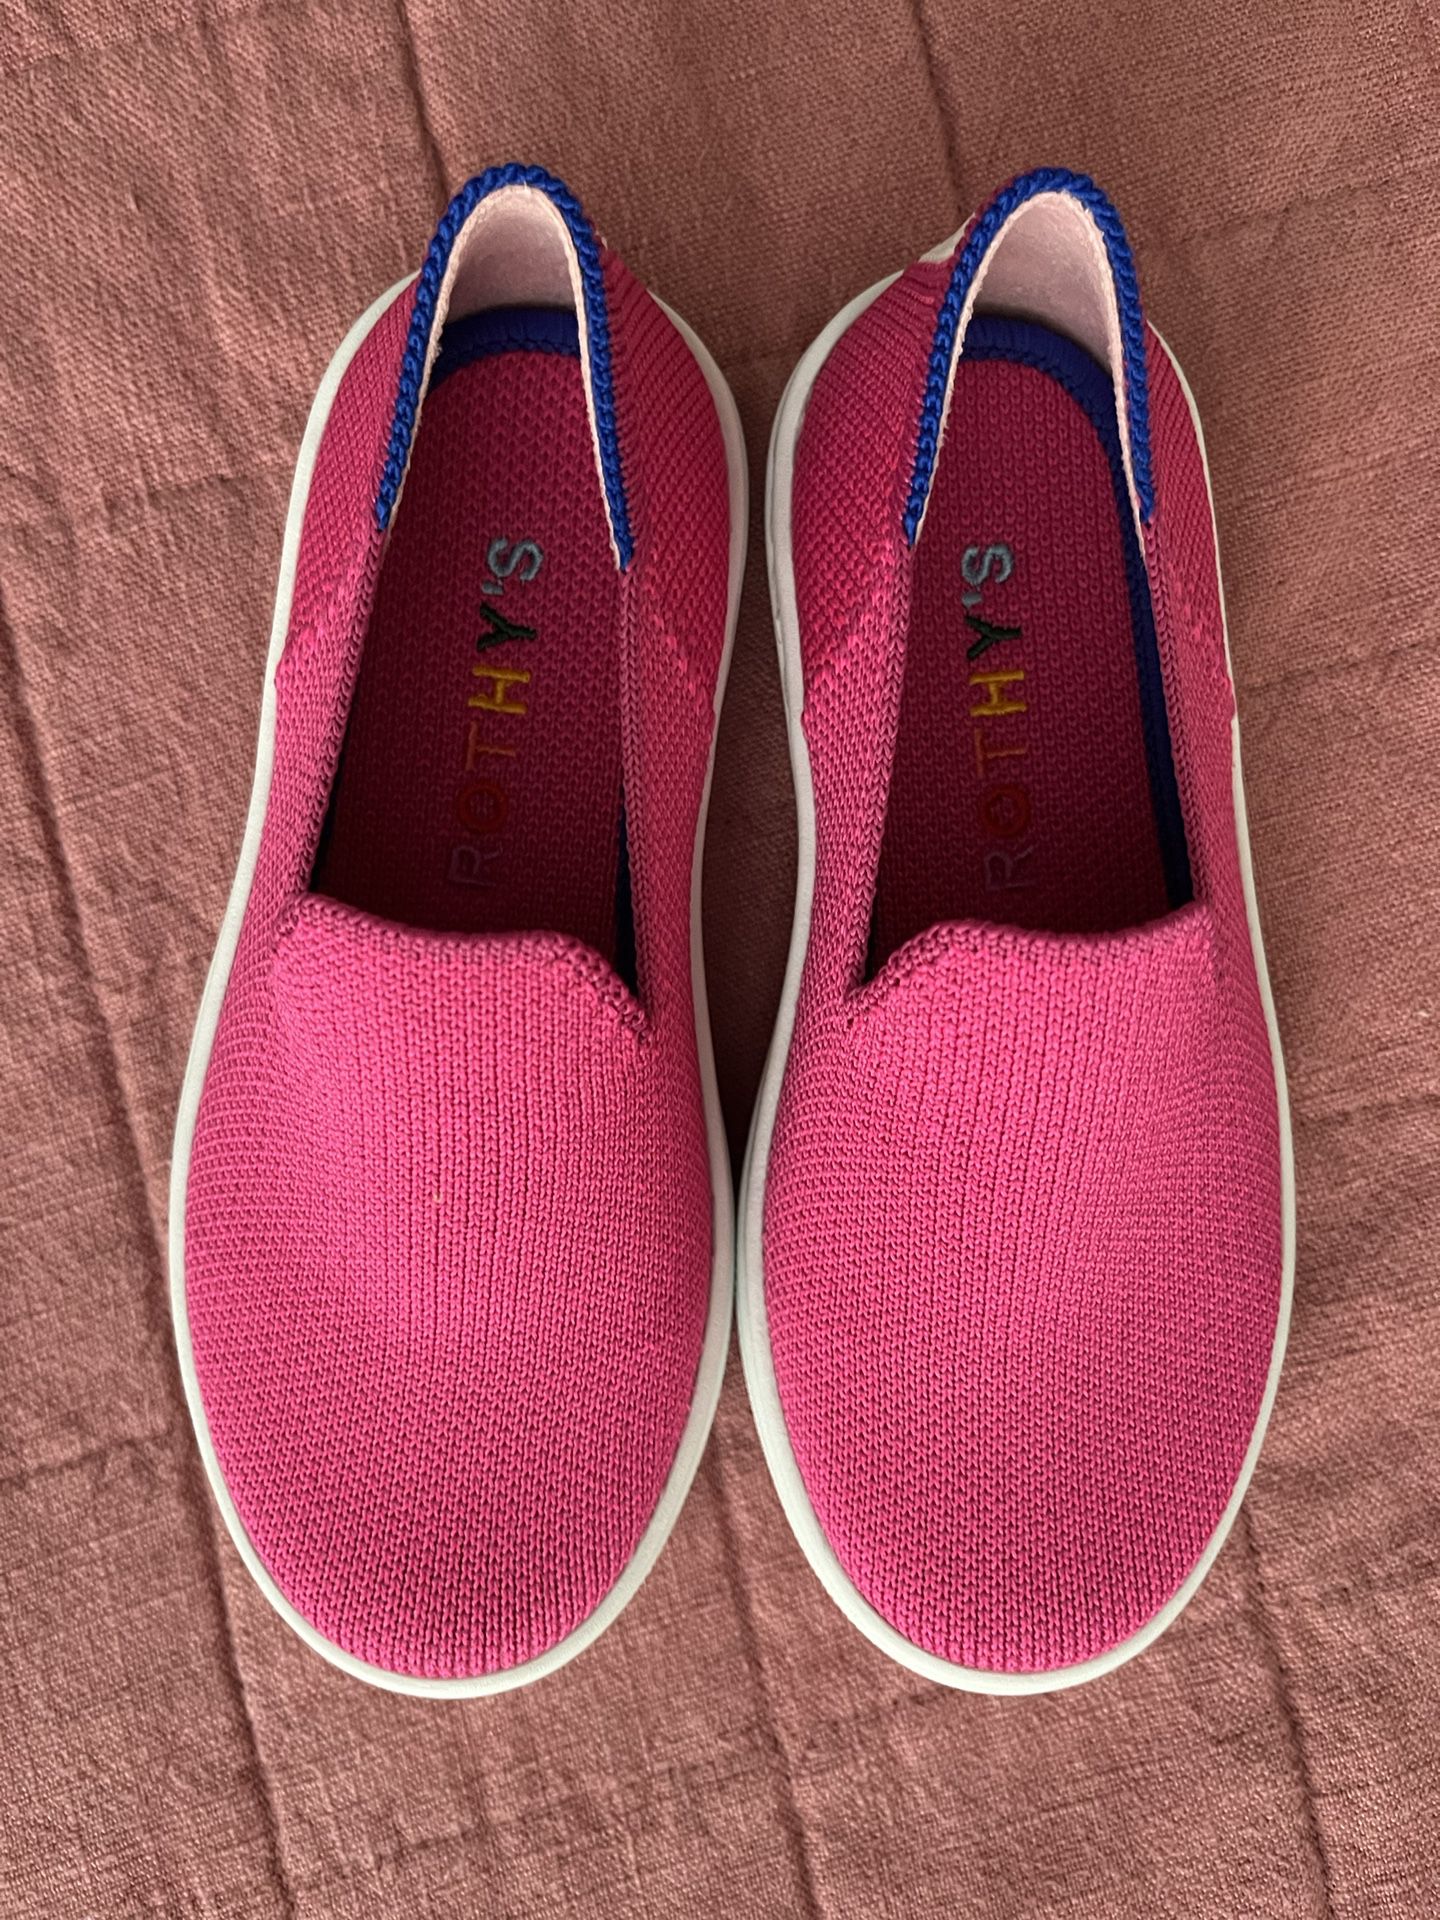 Rothy’s Slip On Toddler Shoes